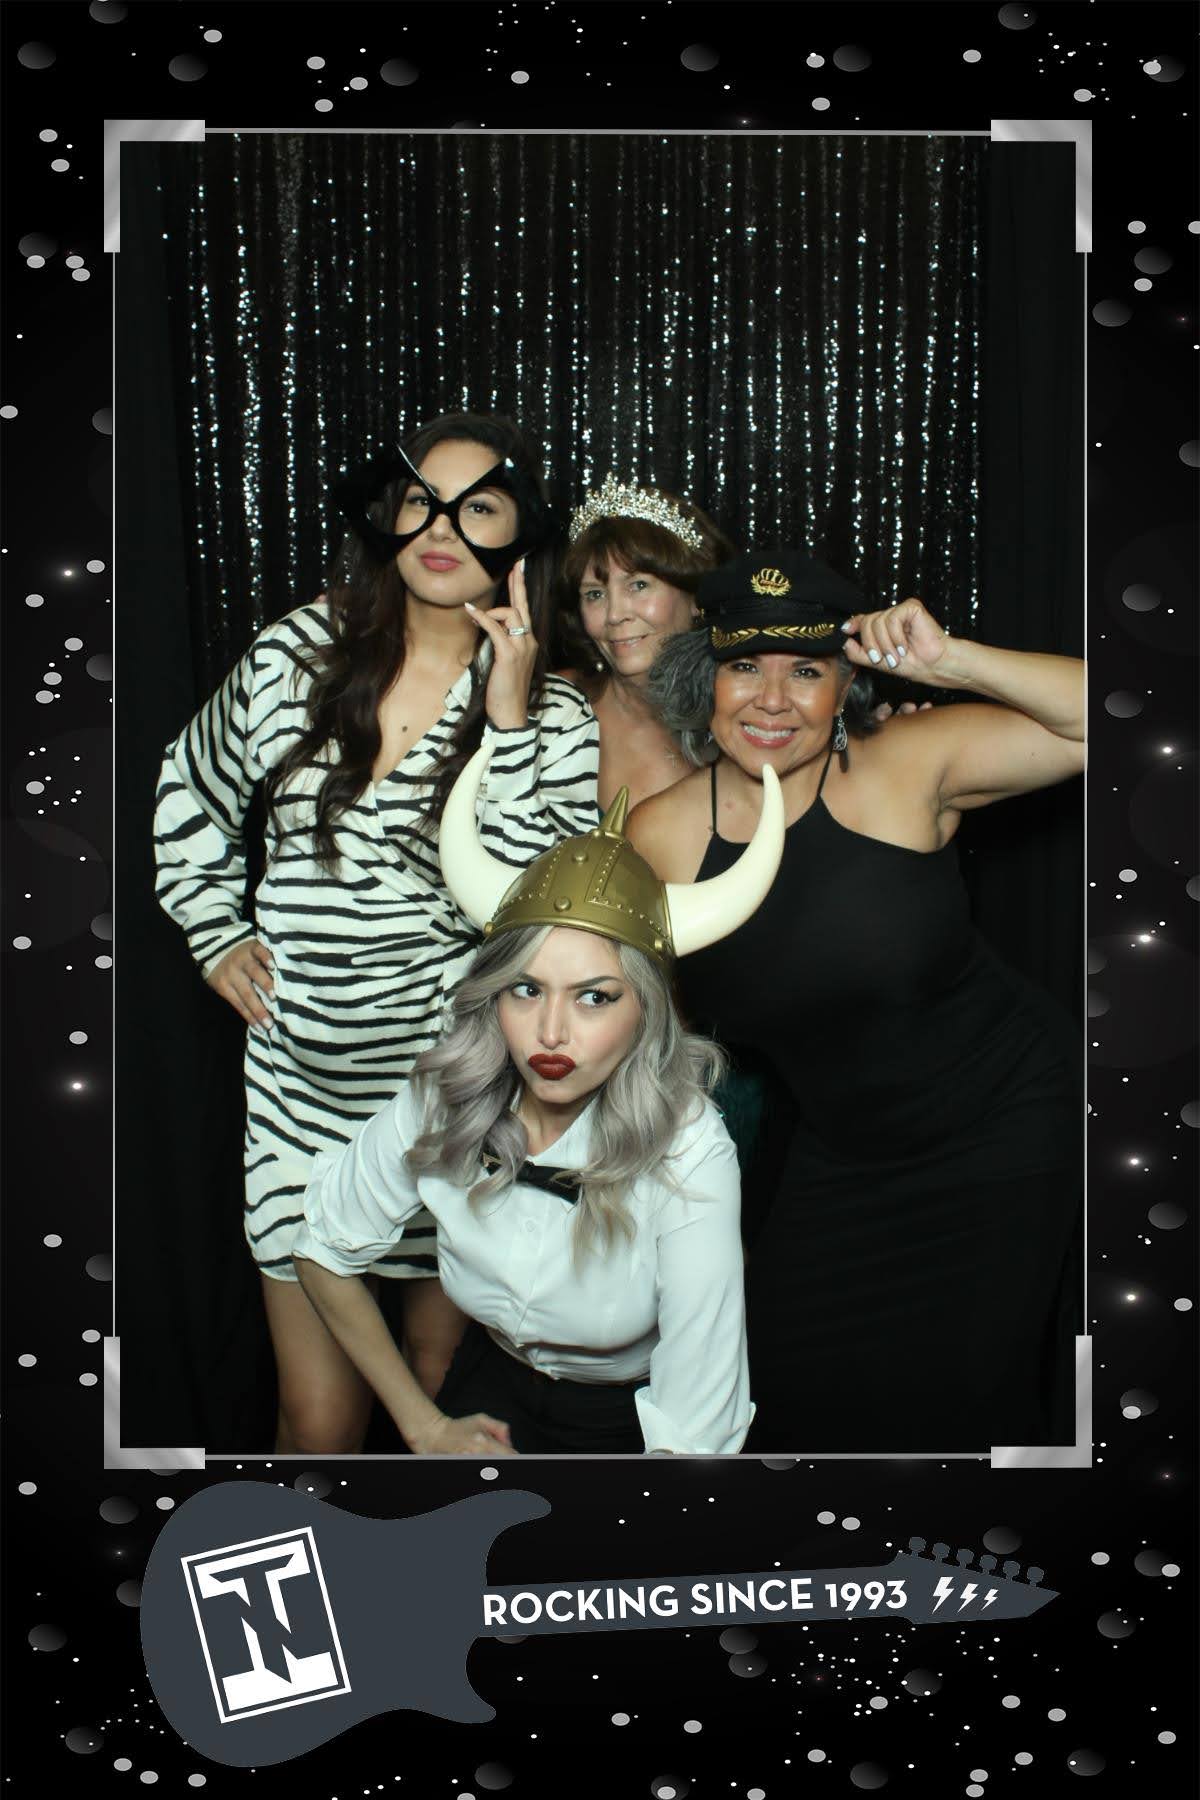 Photo+Booth+gallery+Company+funfunparty+Mirror+X+Photobooth+celebration+Party+The+Westin+Domain+Austin+TX